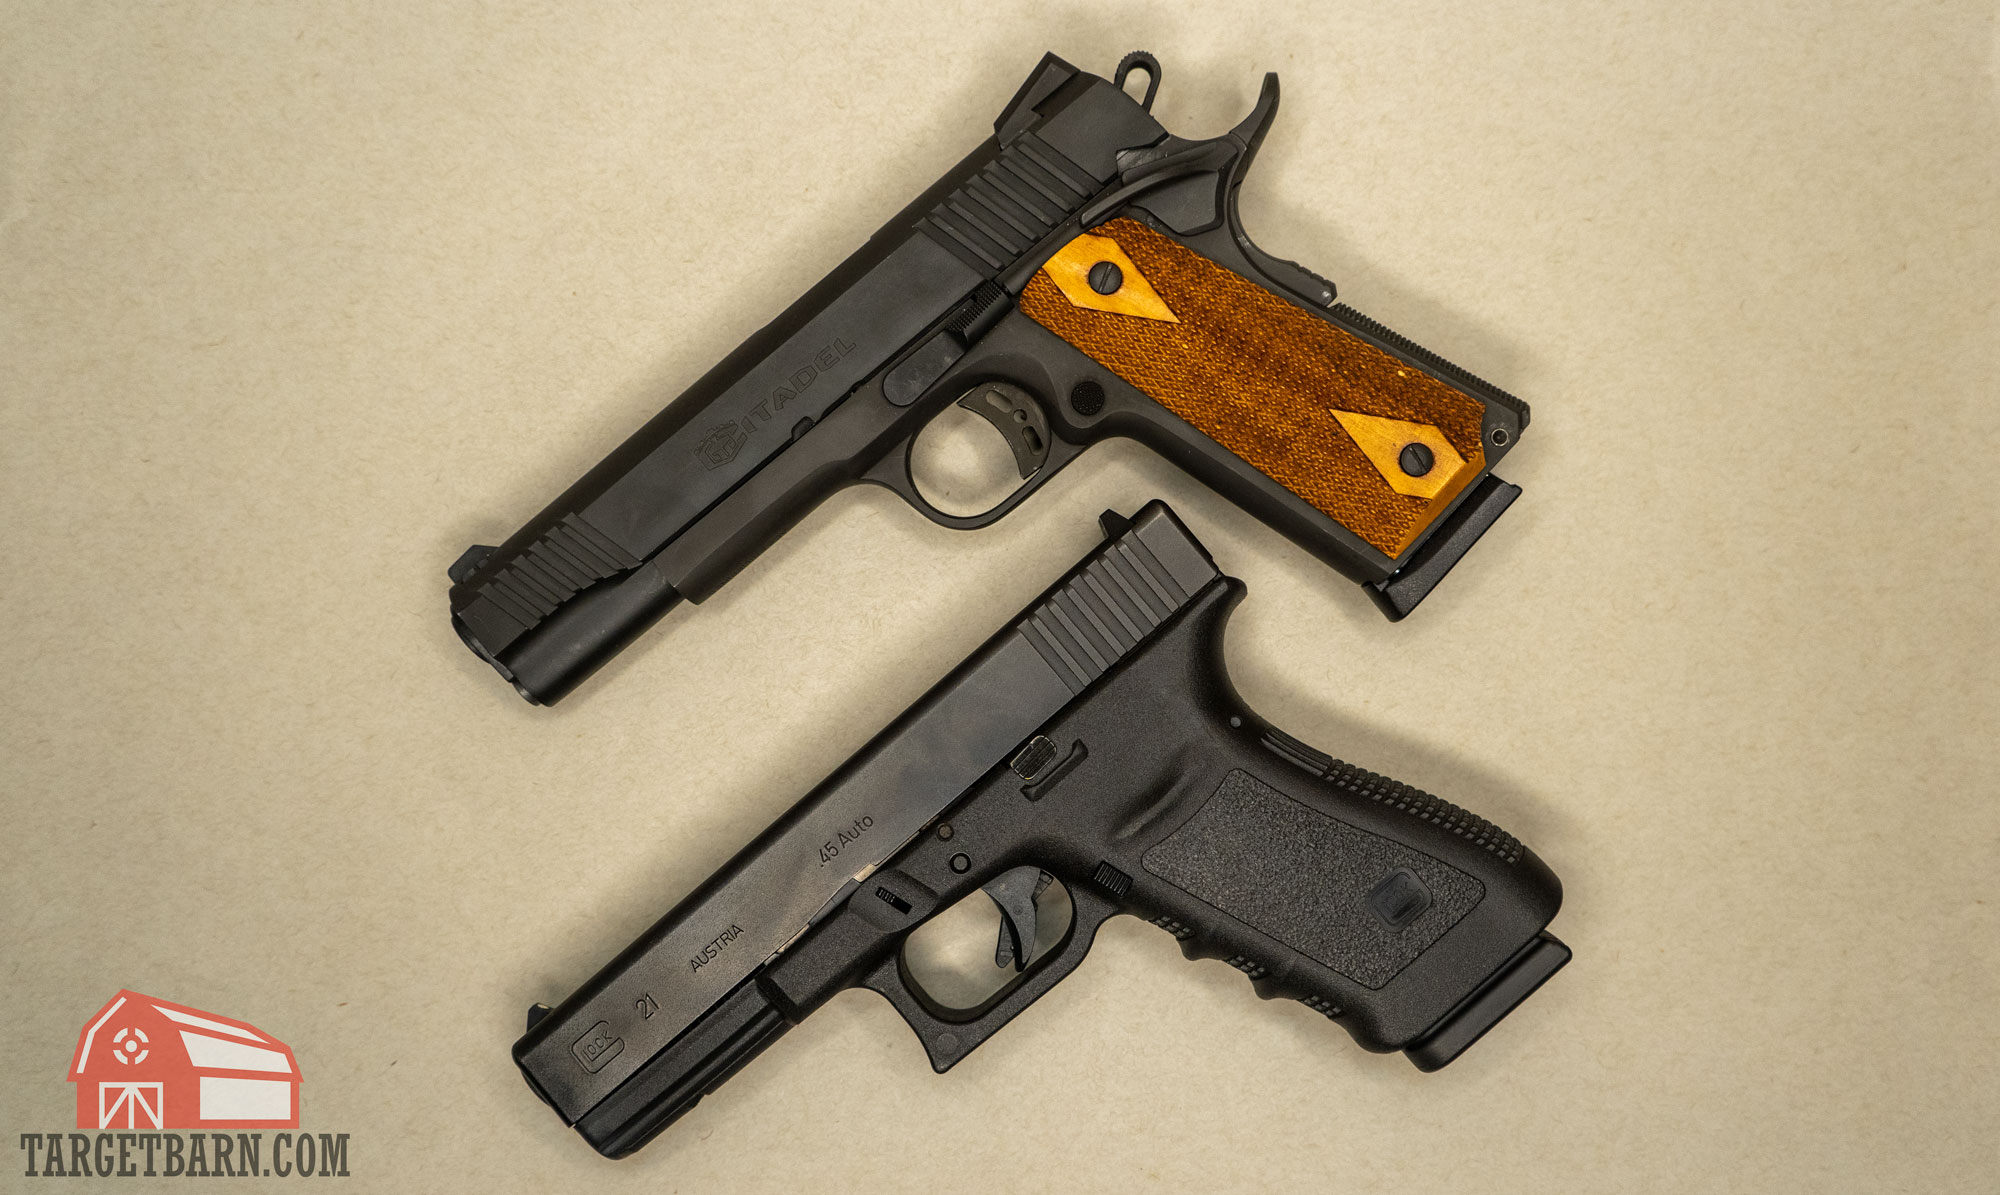 a glock vs. 1911 next to each other